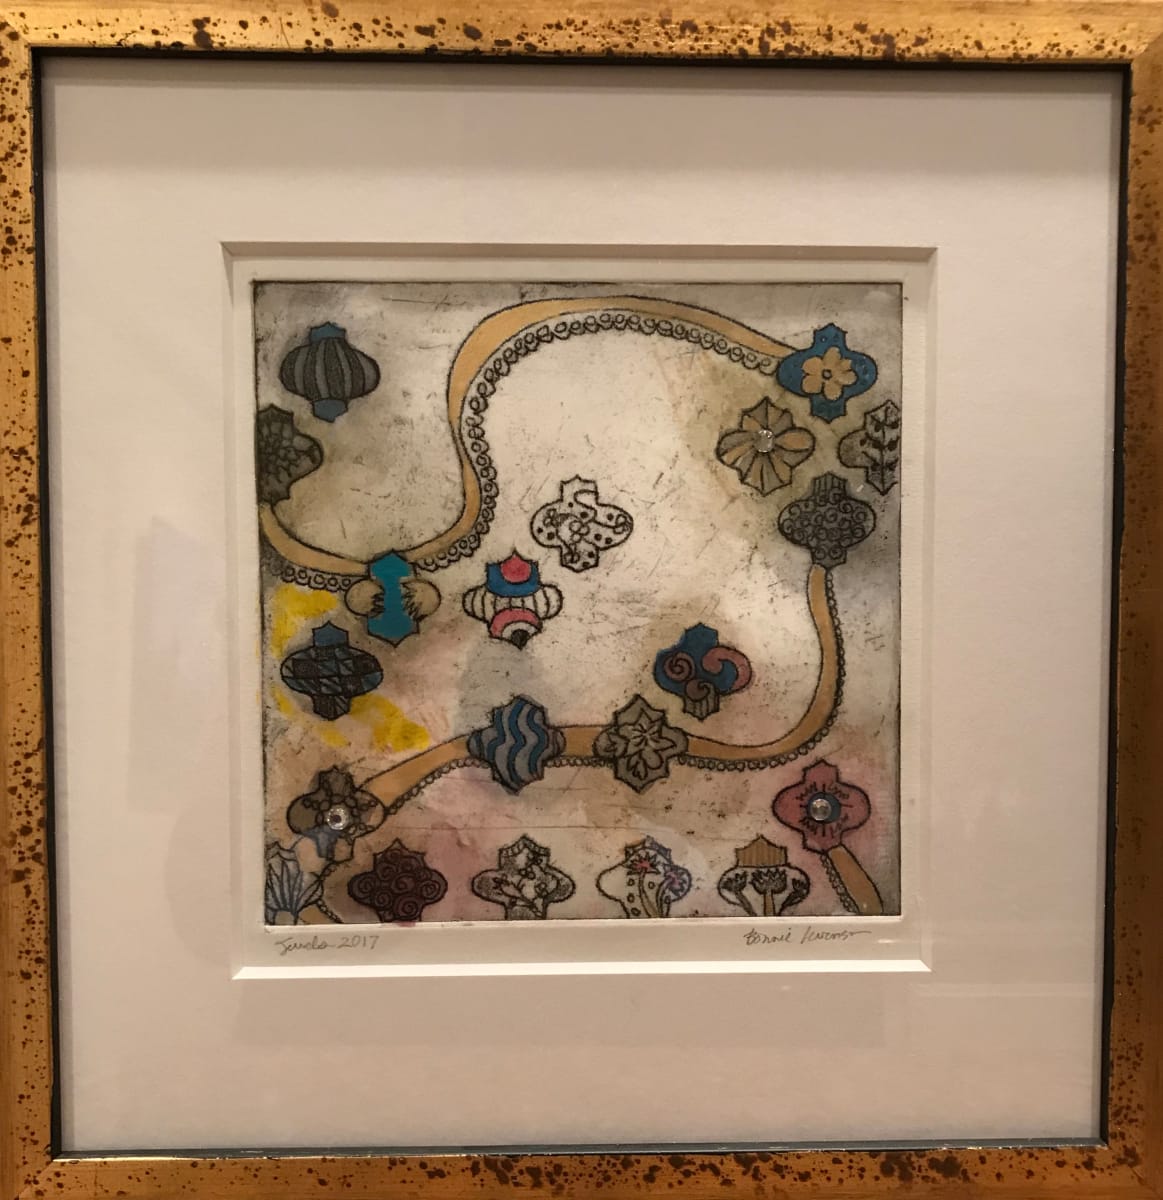 Jewels of India (copy)( framed) by Bonnie Levinson 